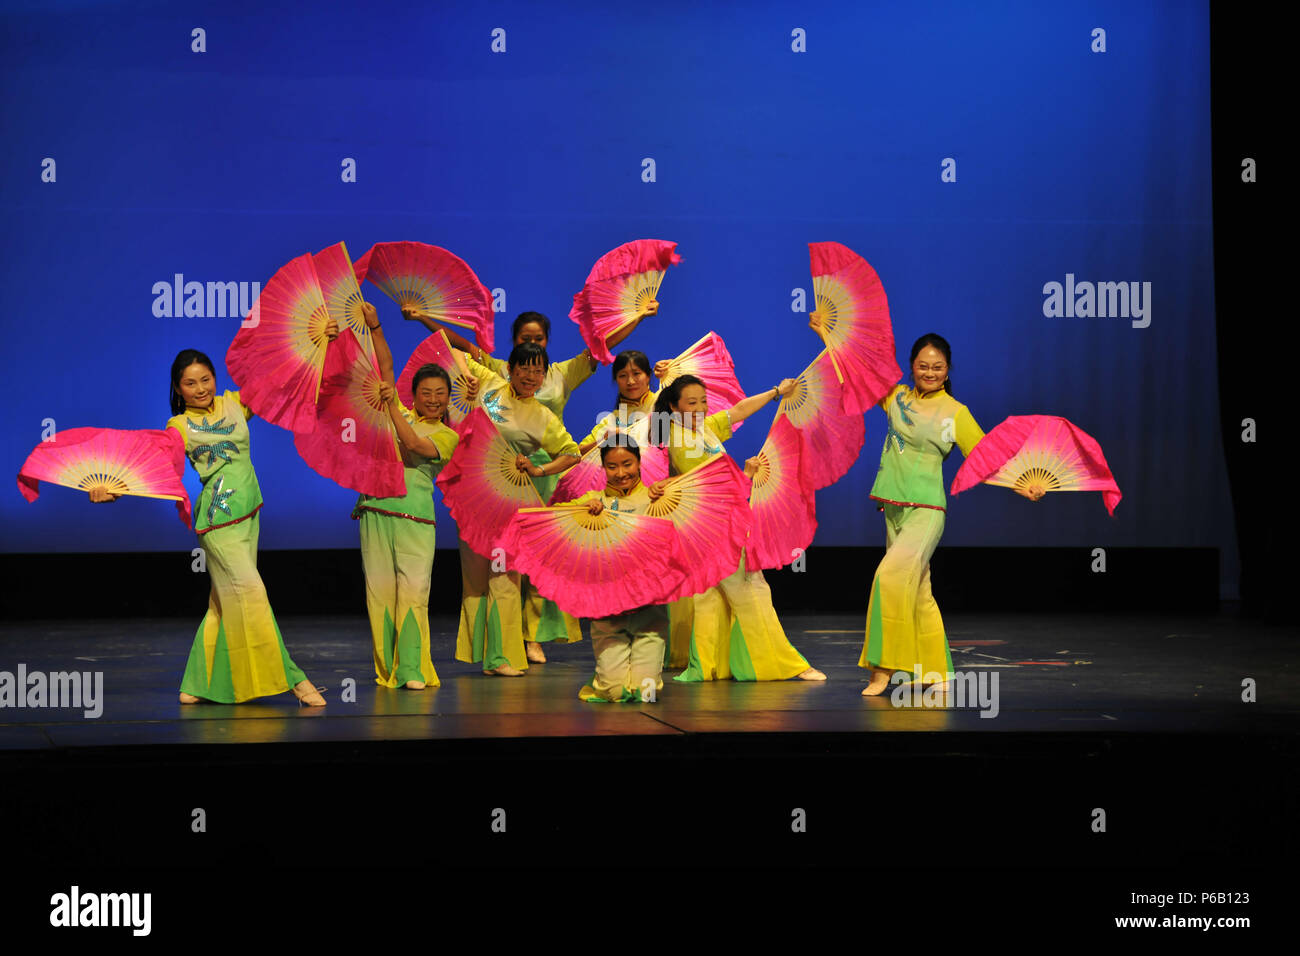 Defense Language Institute Foreign Language Center Mandarin Chinese instructors perform a dance during the 41st Annual Mandarin Speech Contest in San Francisco April 23, though they did not judge their own students. Service members studying Mandarin Chinese participated with 36 DLIFLC students winning awards. Stock Photo